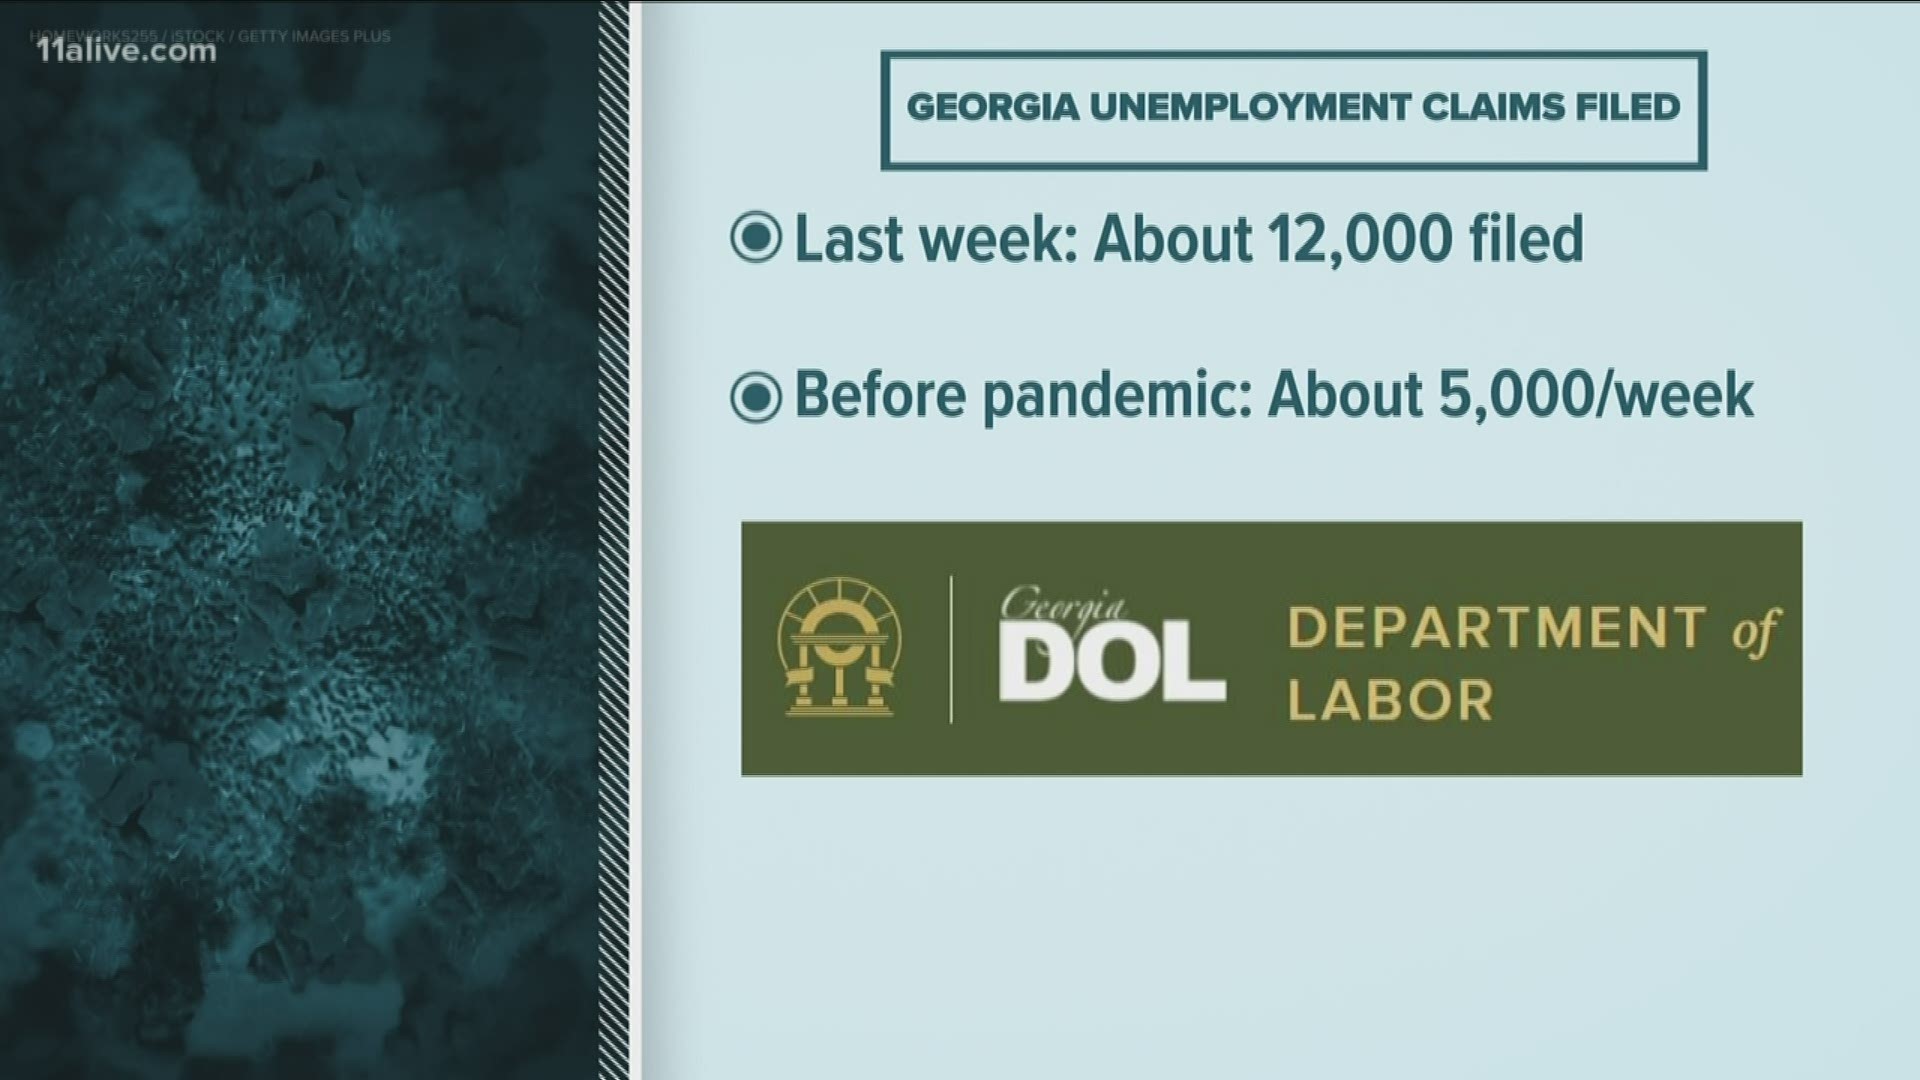 Before the pandemic there were only 5,000 claims -- now that number has doubled.